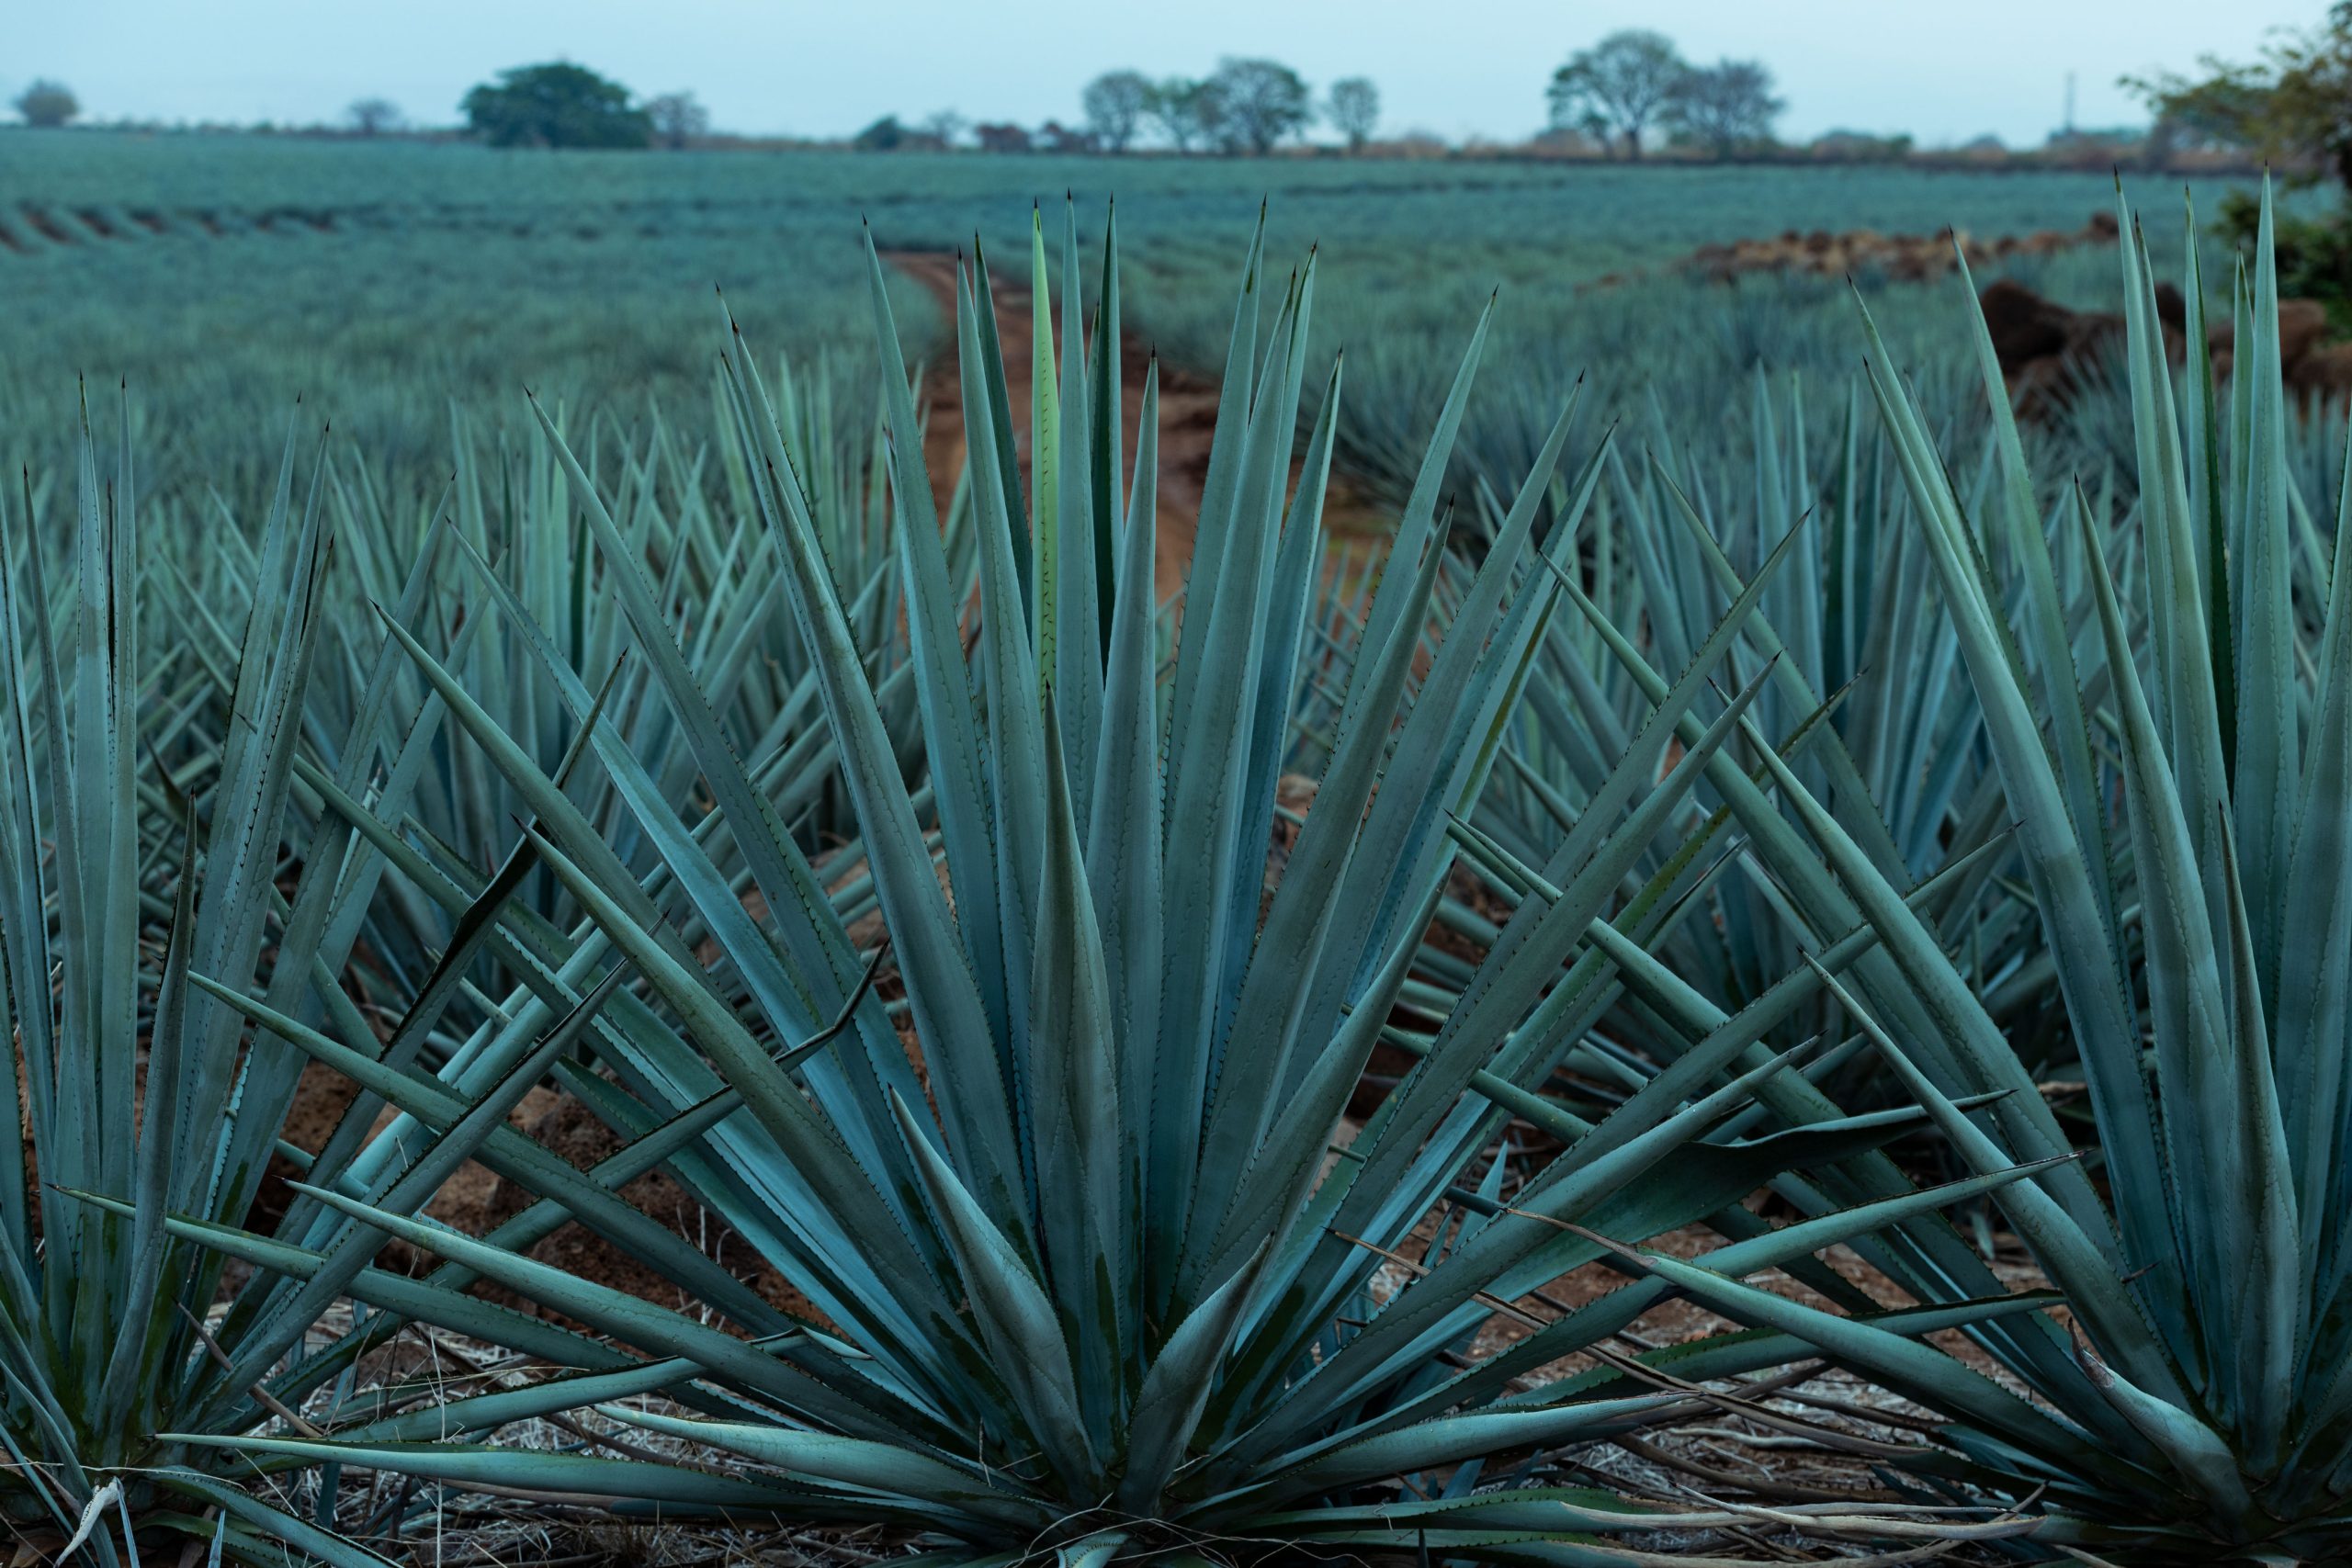 Nobazul, we share the benefits of the Agave throughout the world